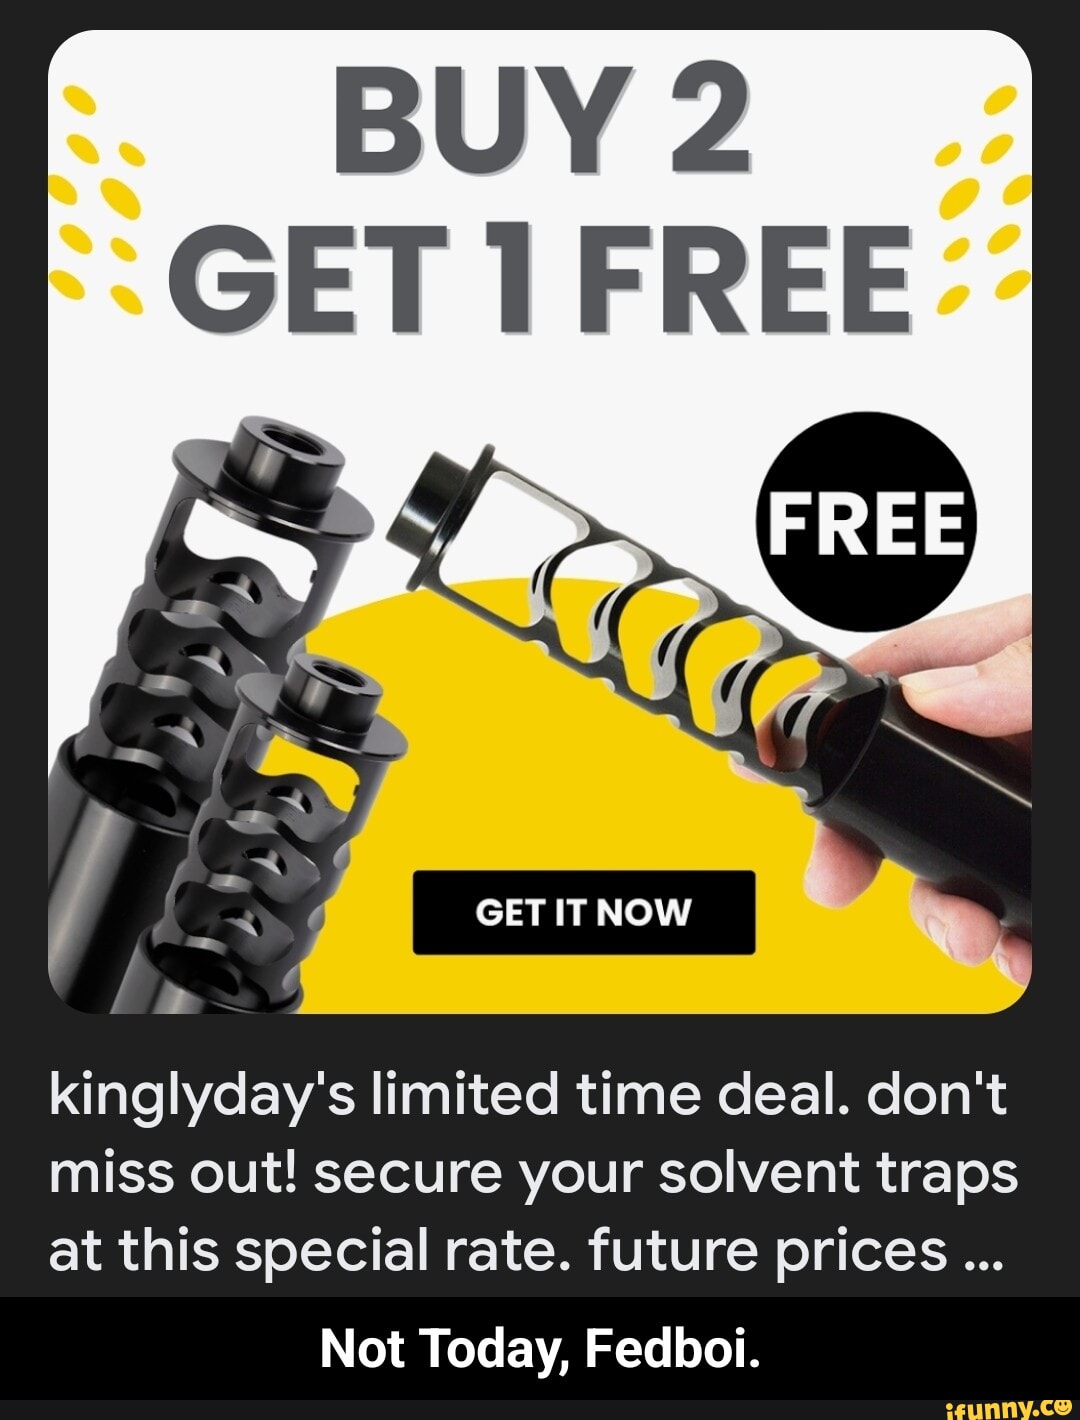 BUY 2 GET I FREE GET IT NOW kinglyday's limited time deal. don't